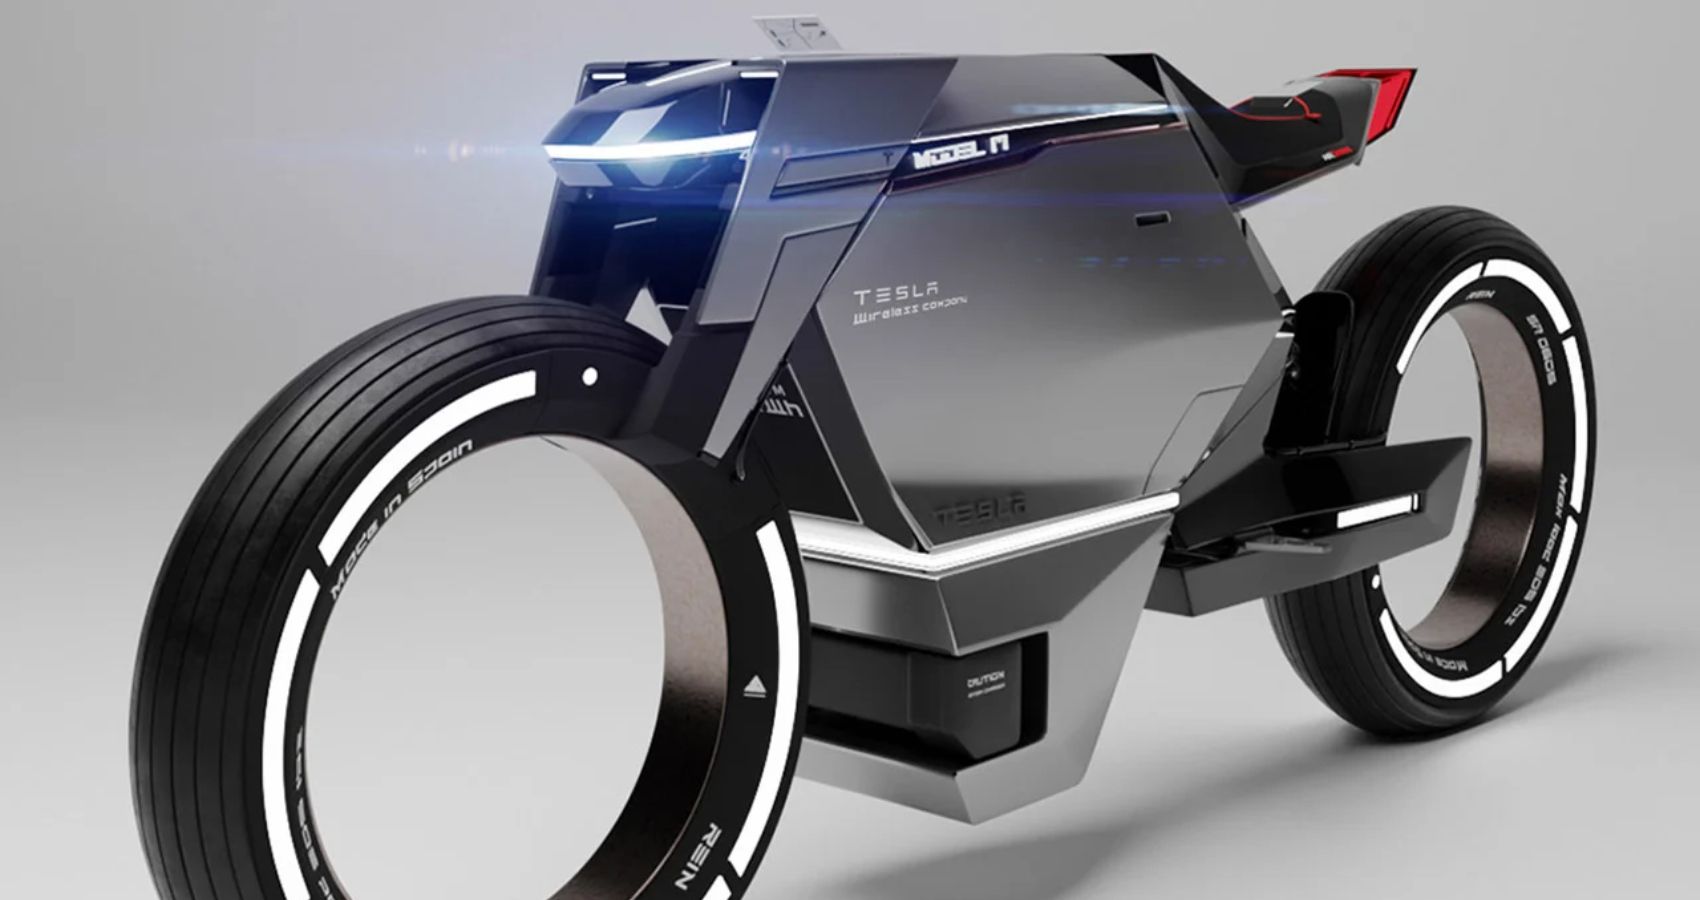 This Cybertruck Inspired Bike, Called Tesla Model M, Looks Awesome